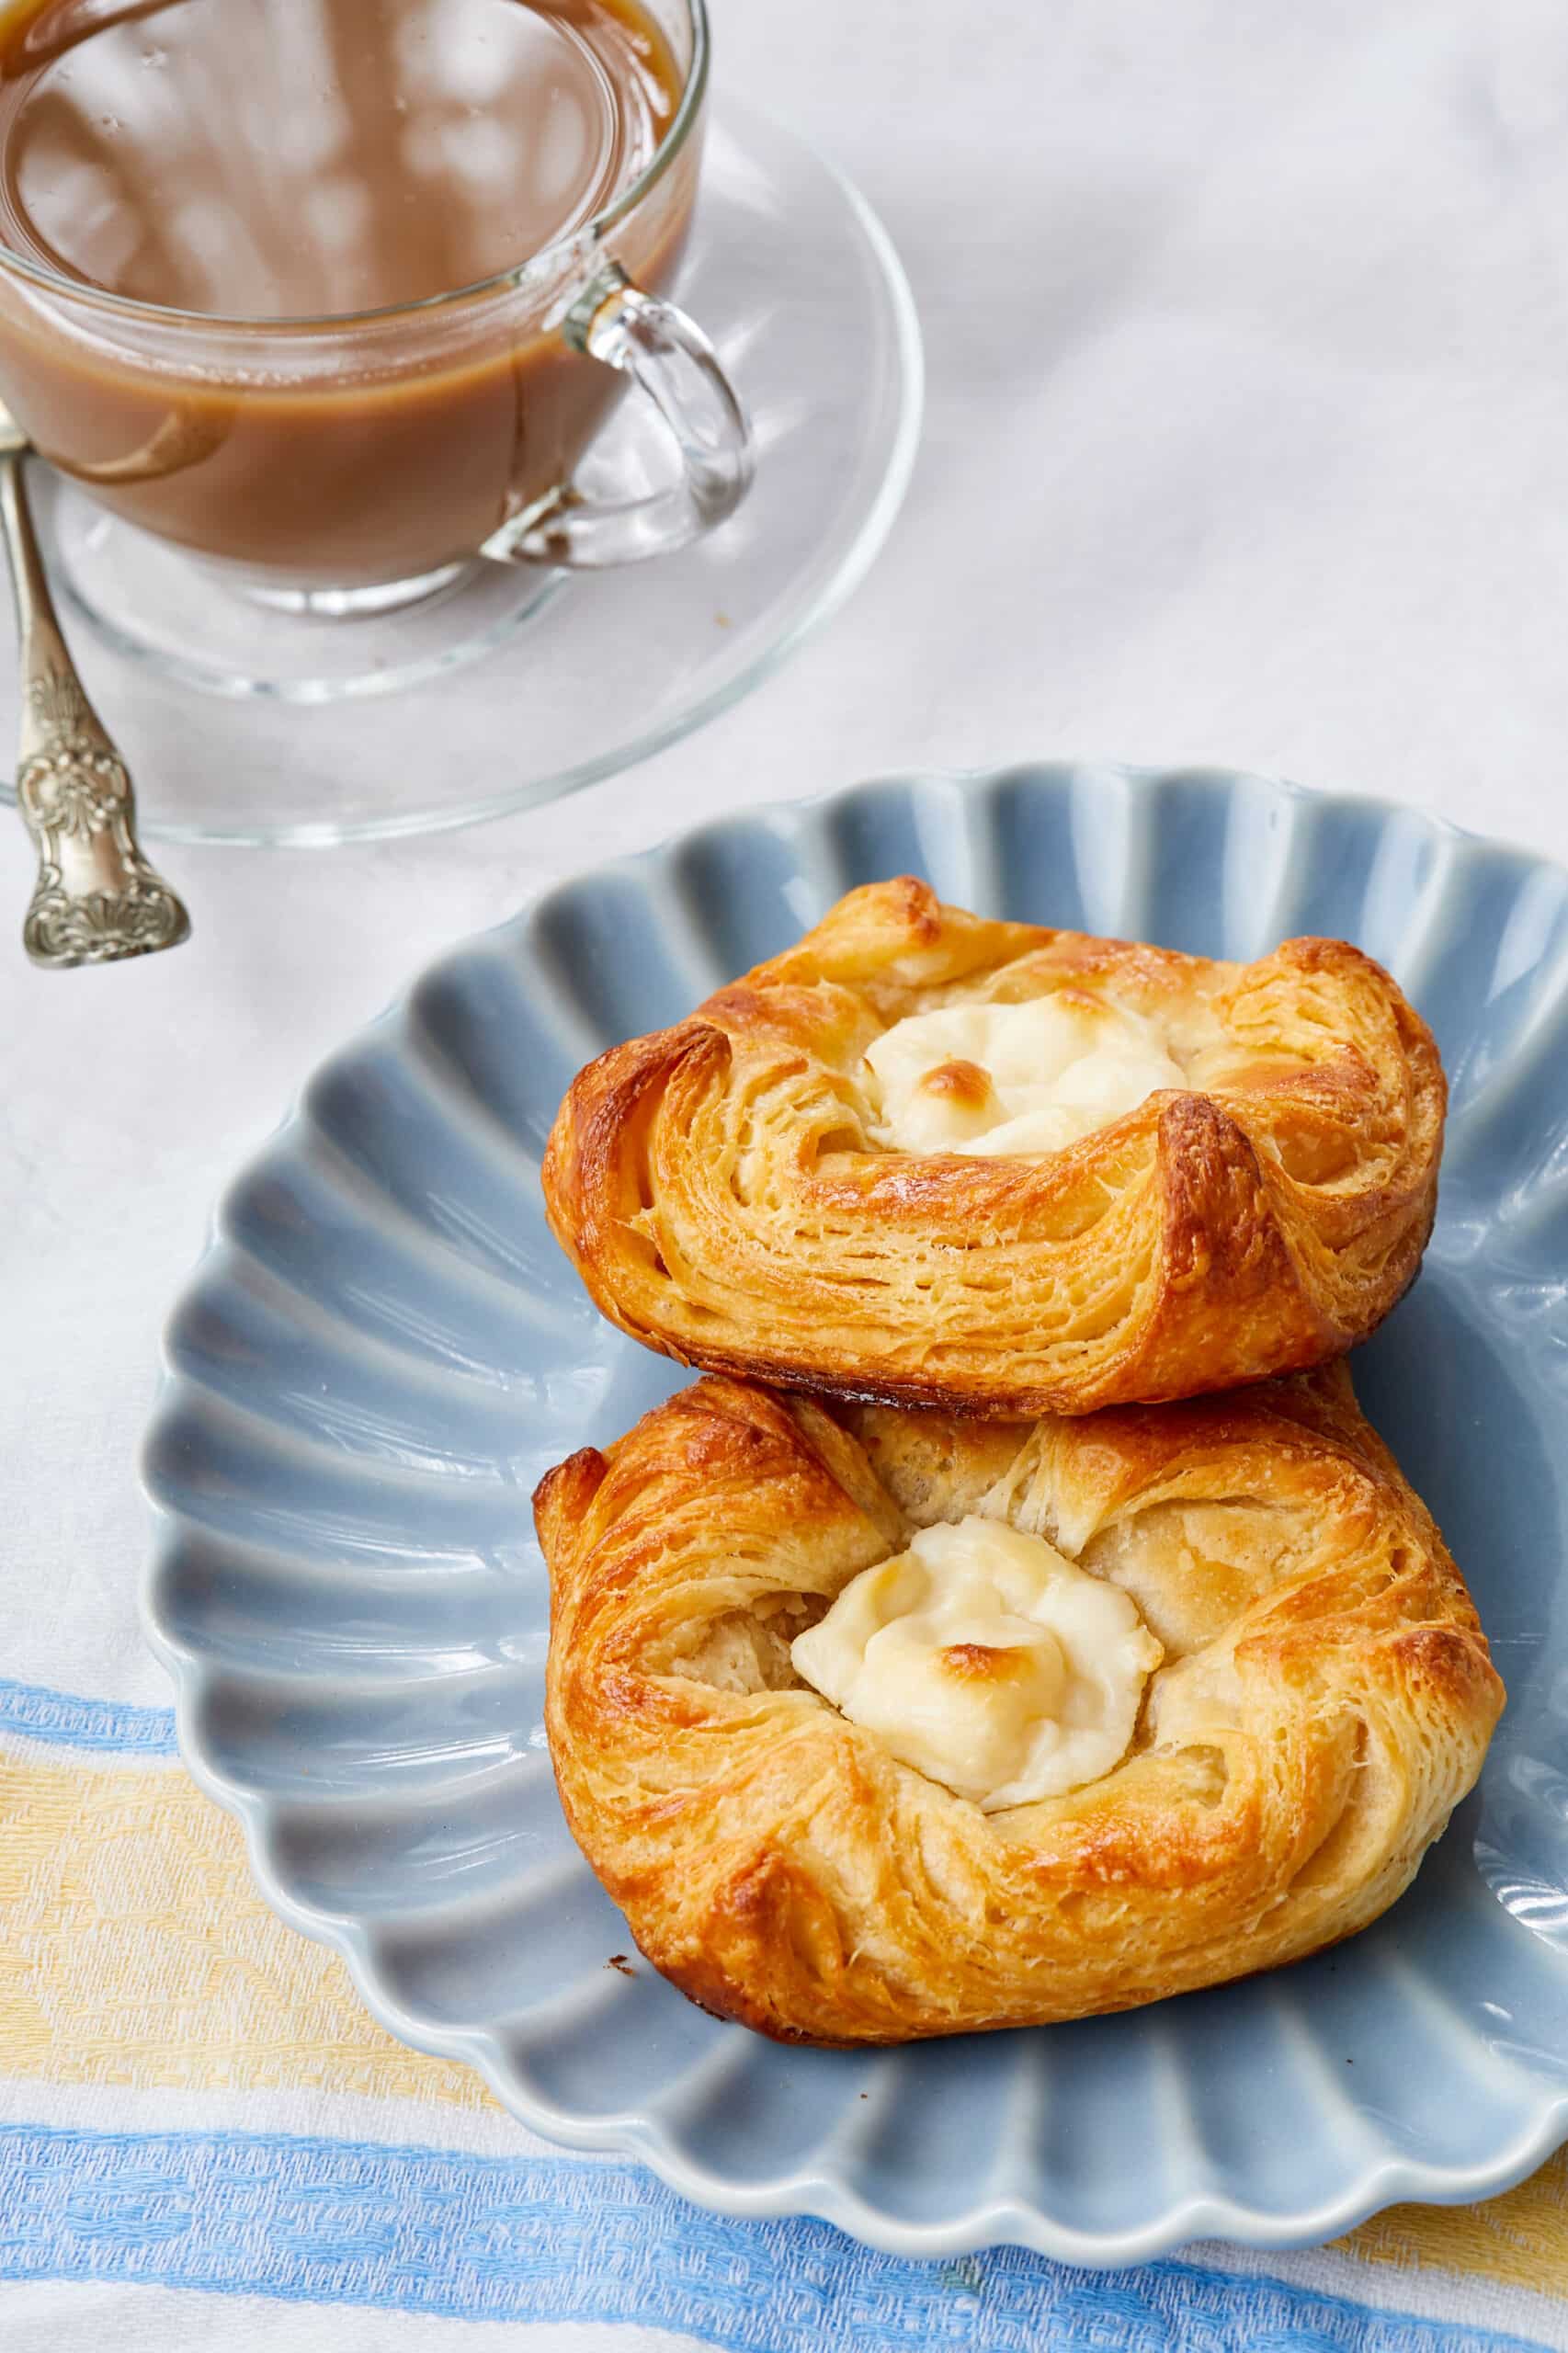 Two golden, flaky Cheese Danish are served with a cup of tea.